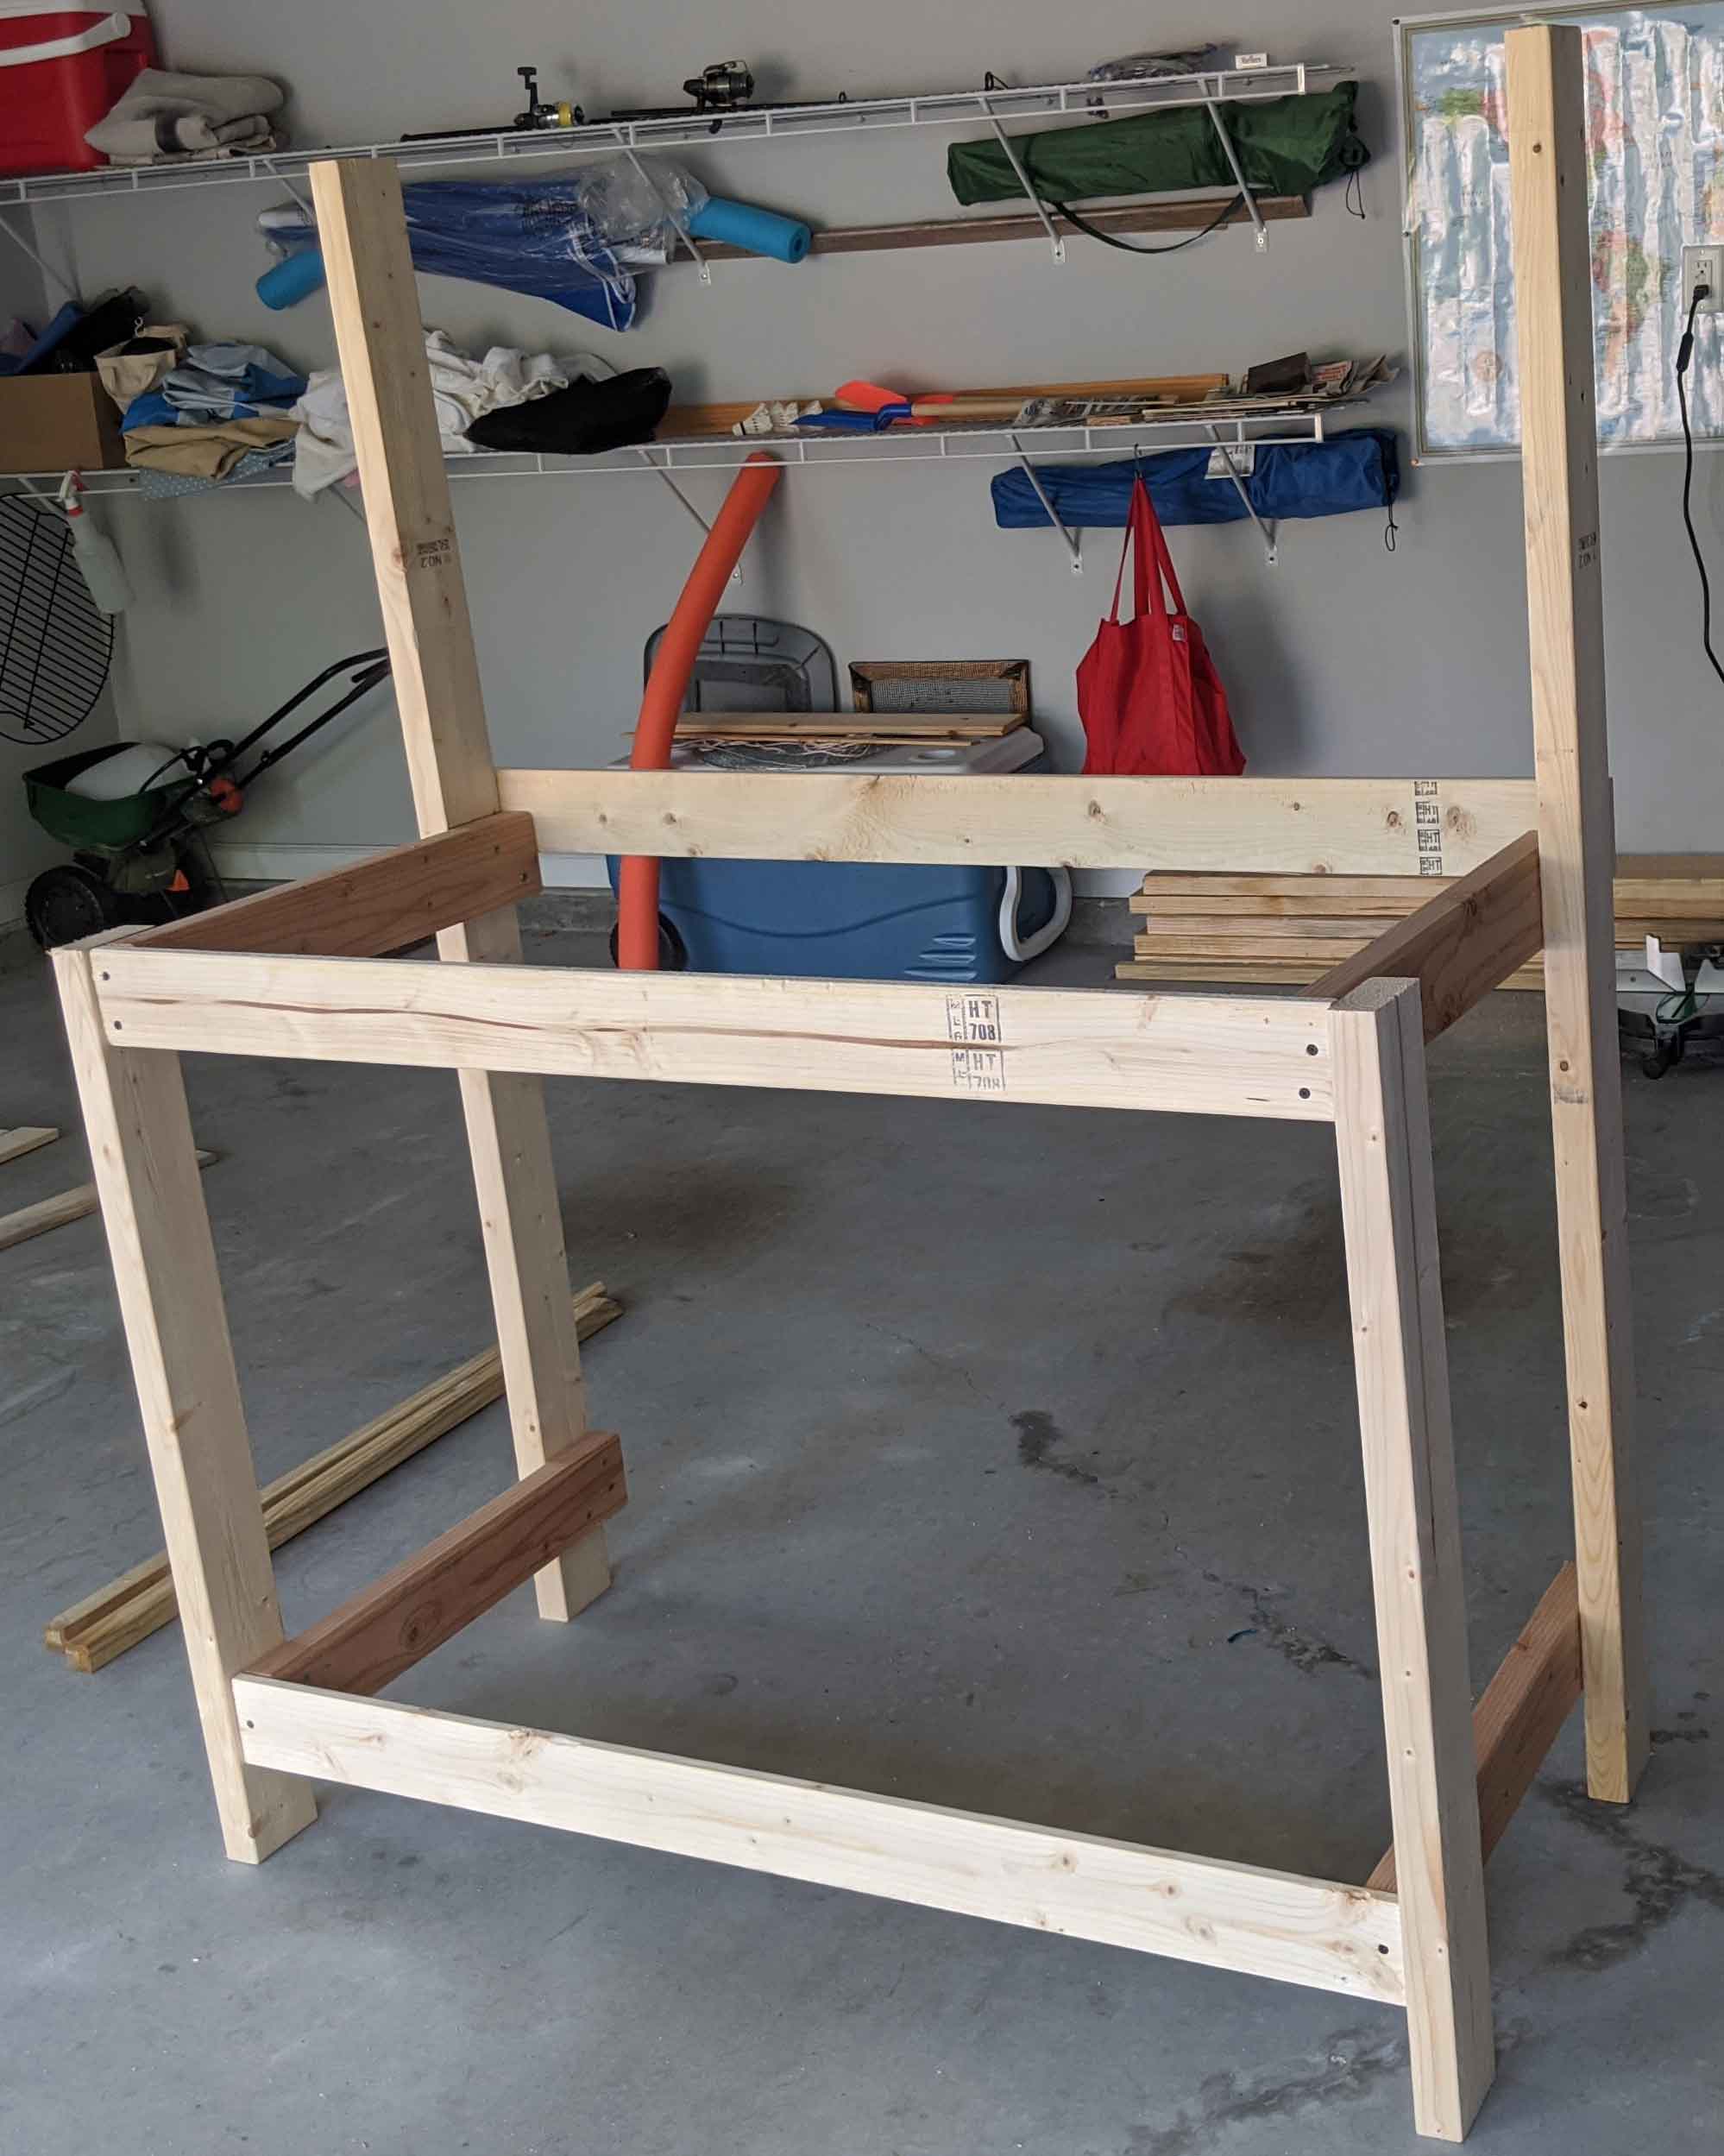 outline structure of the potting table built